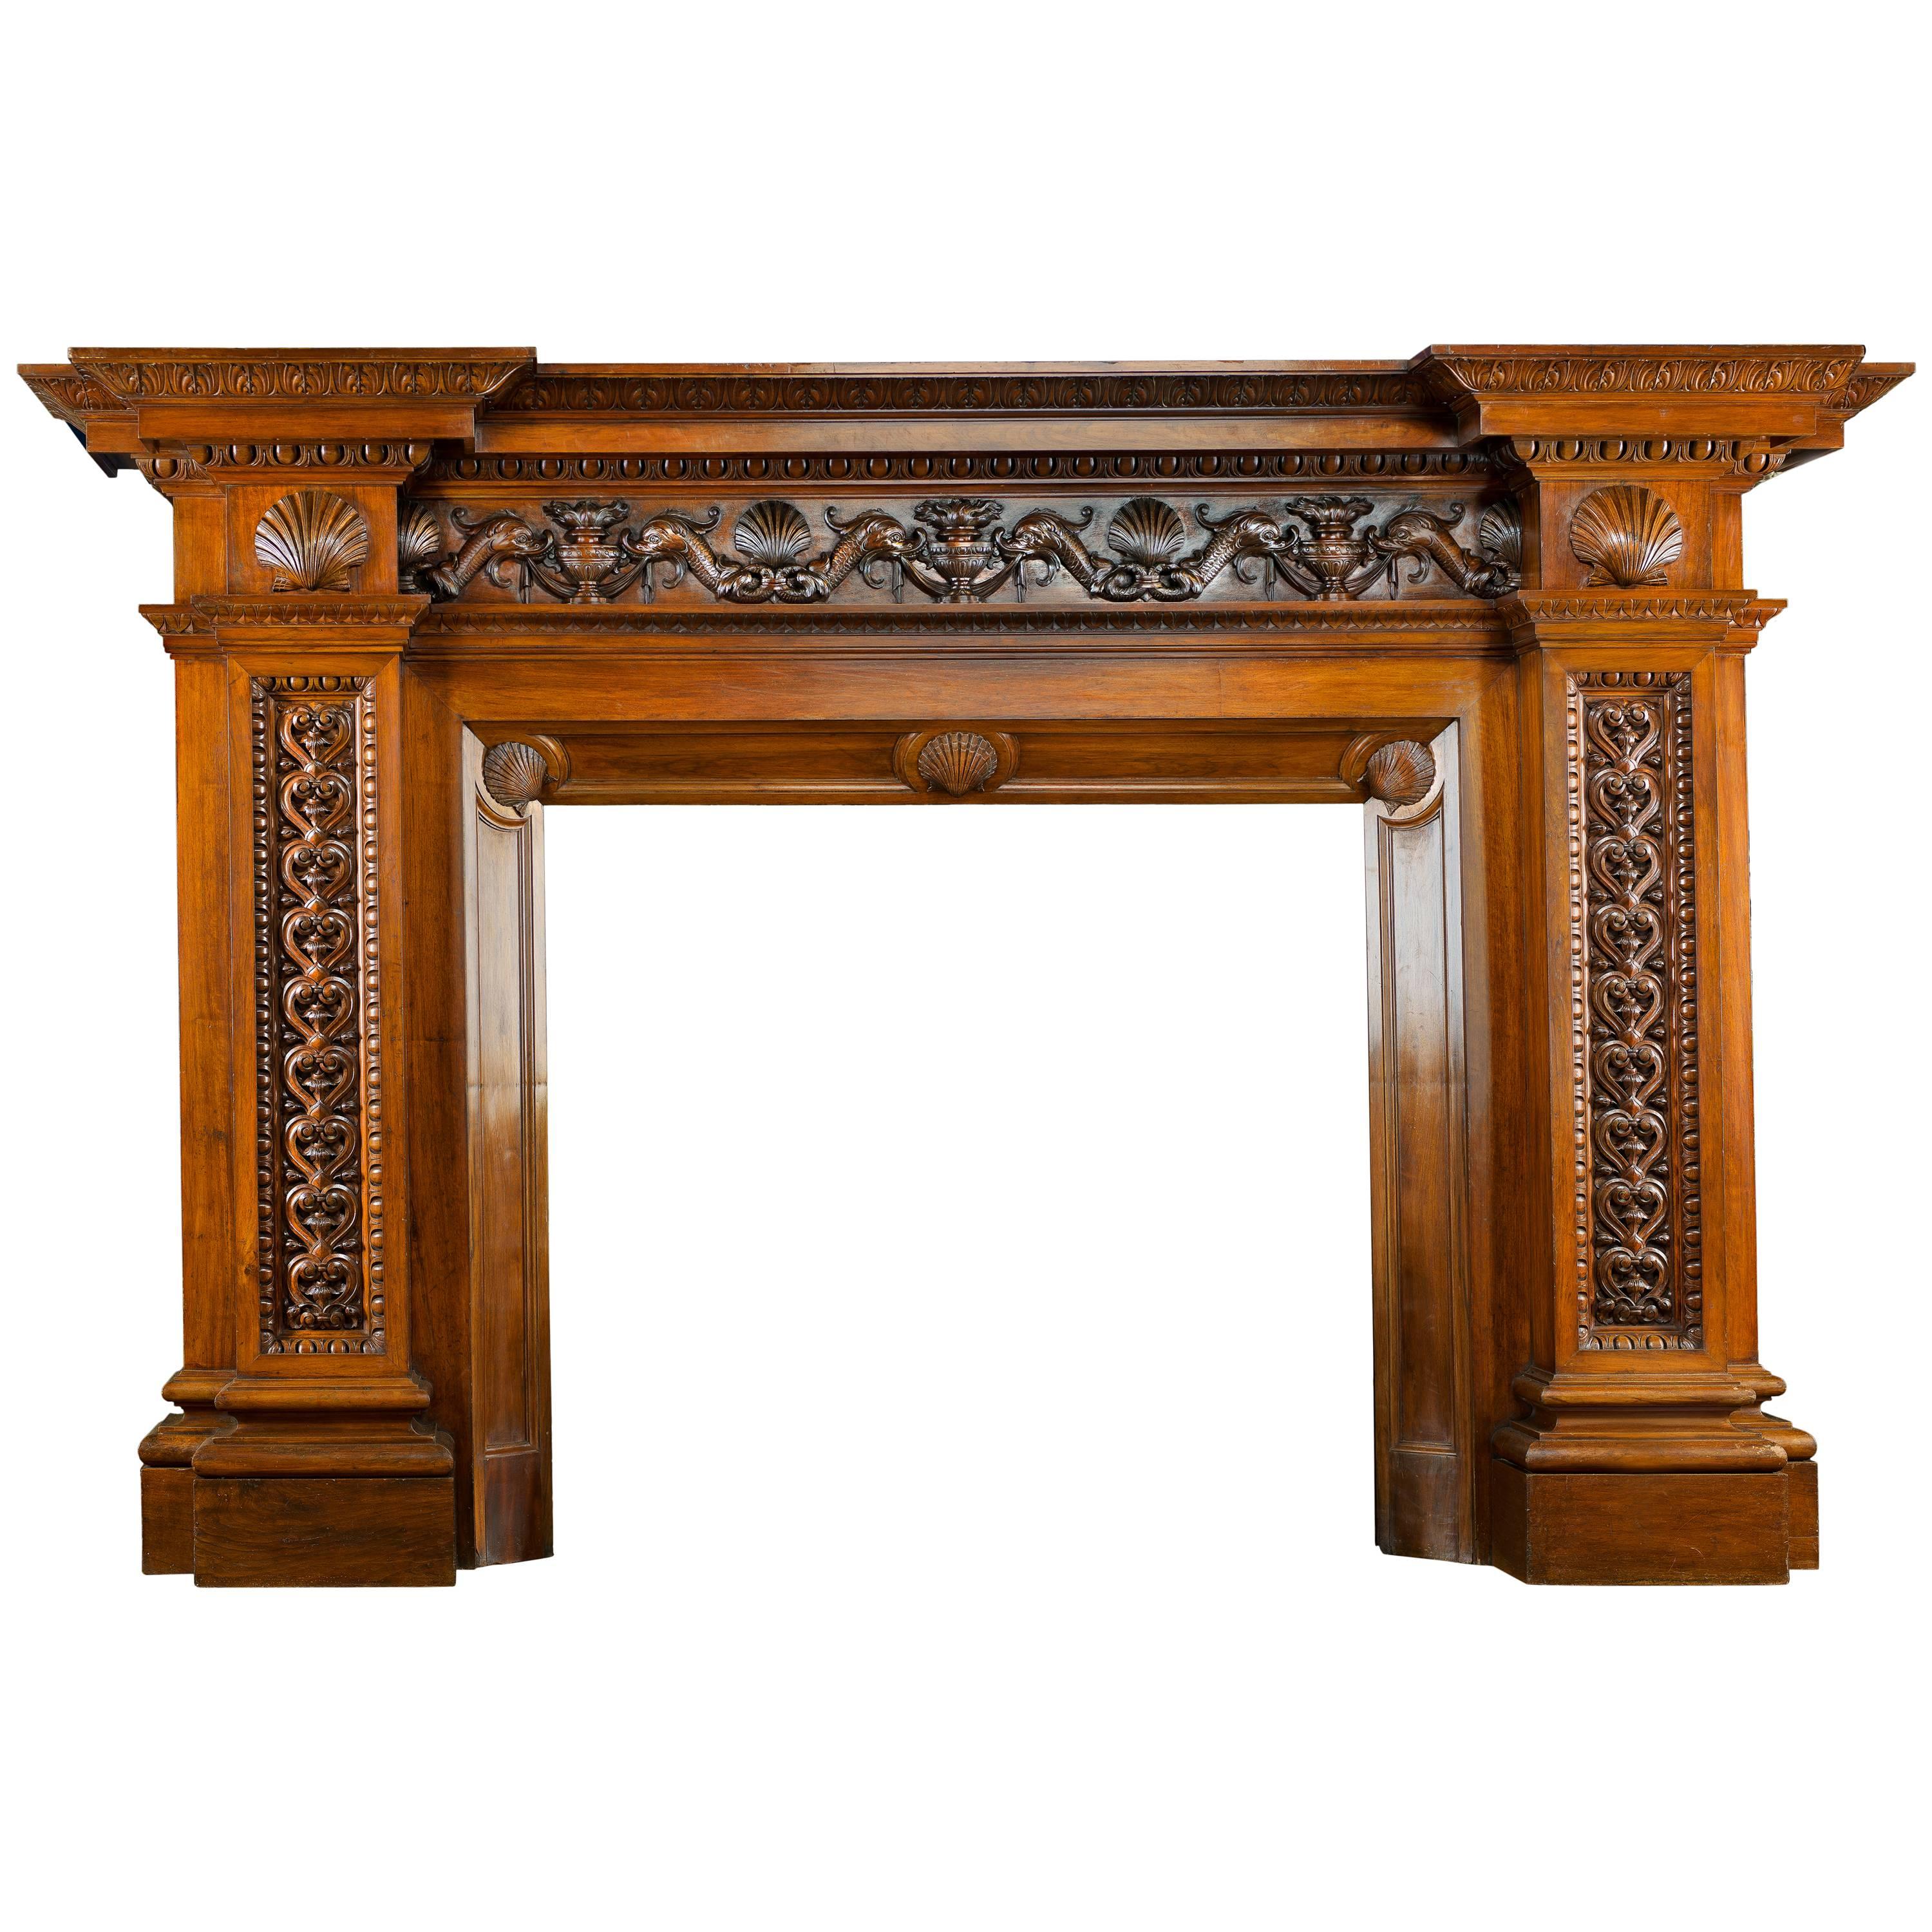 Enormous Antique Walnut Fireplace Mantel Signed Carlo Scarselli For Sale